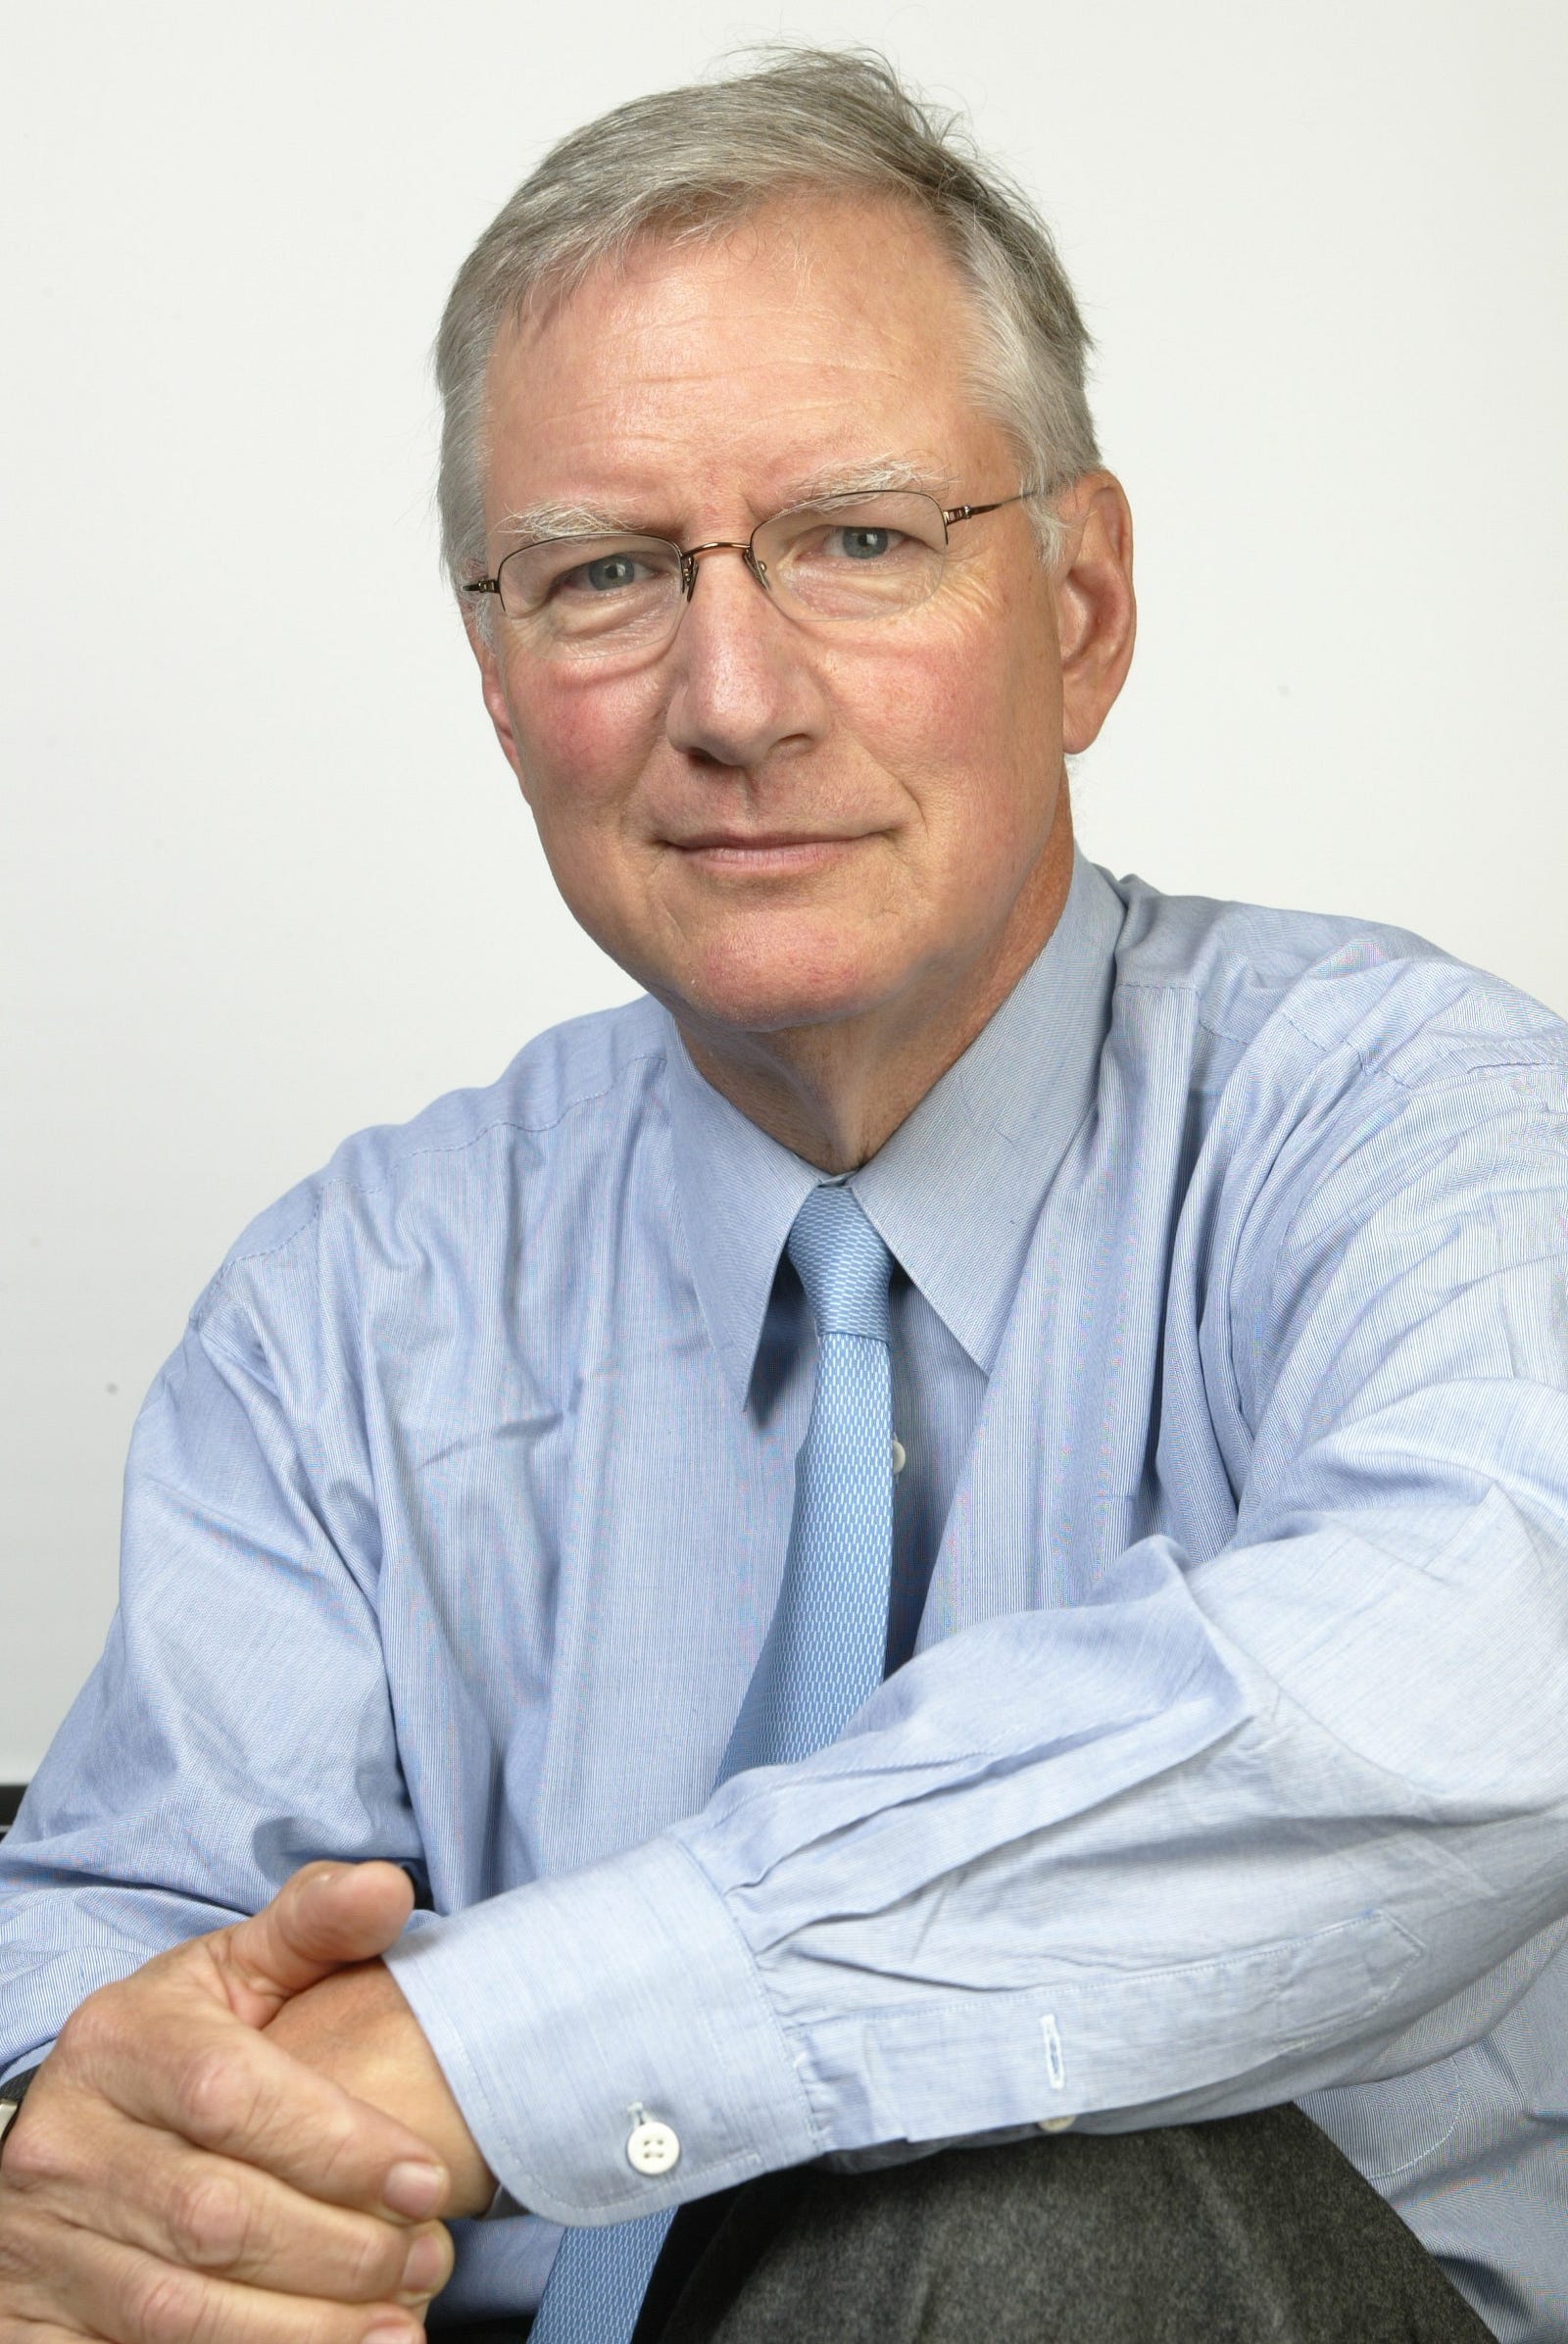 tom peters in search of excellence